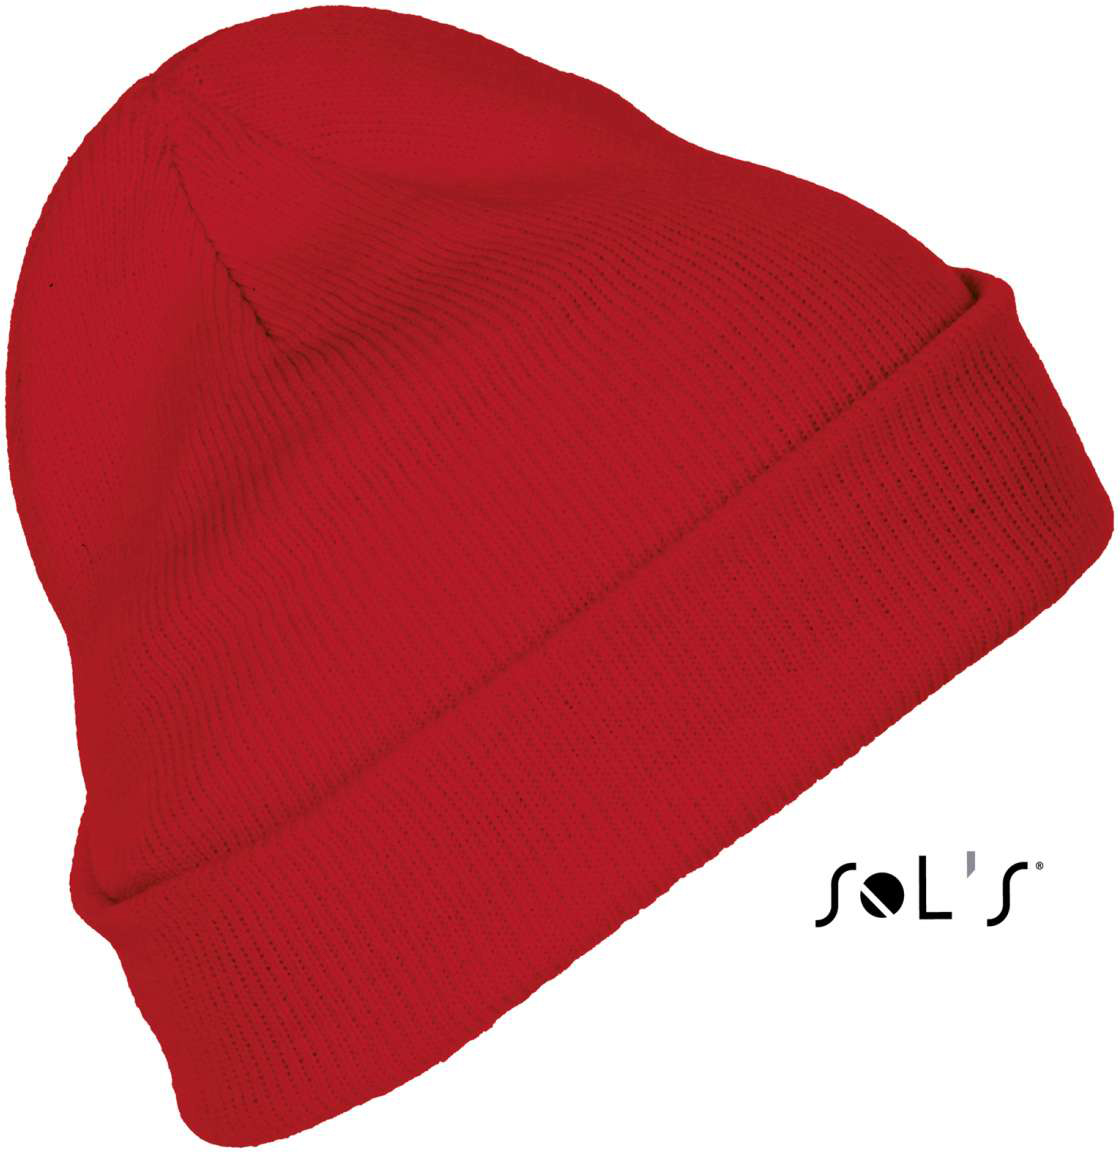 Sol's Pittsburgh - Solid-colour Beanie With Cuffed Design - Sol's Pittsburgh - Solid-colour Beanie With Cuffed Design - Red